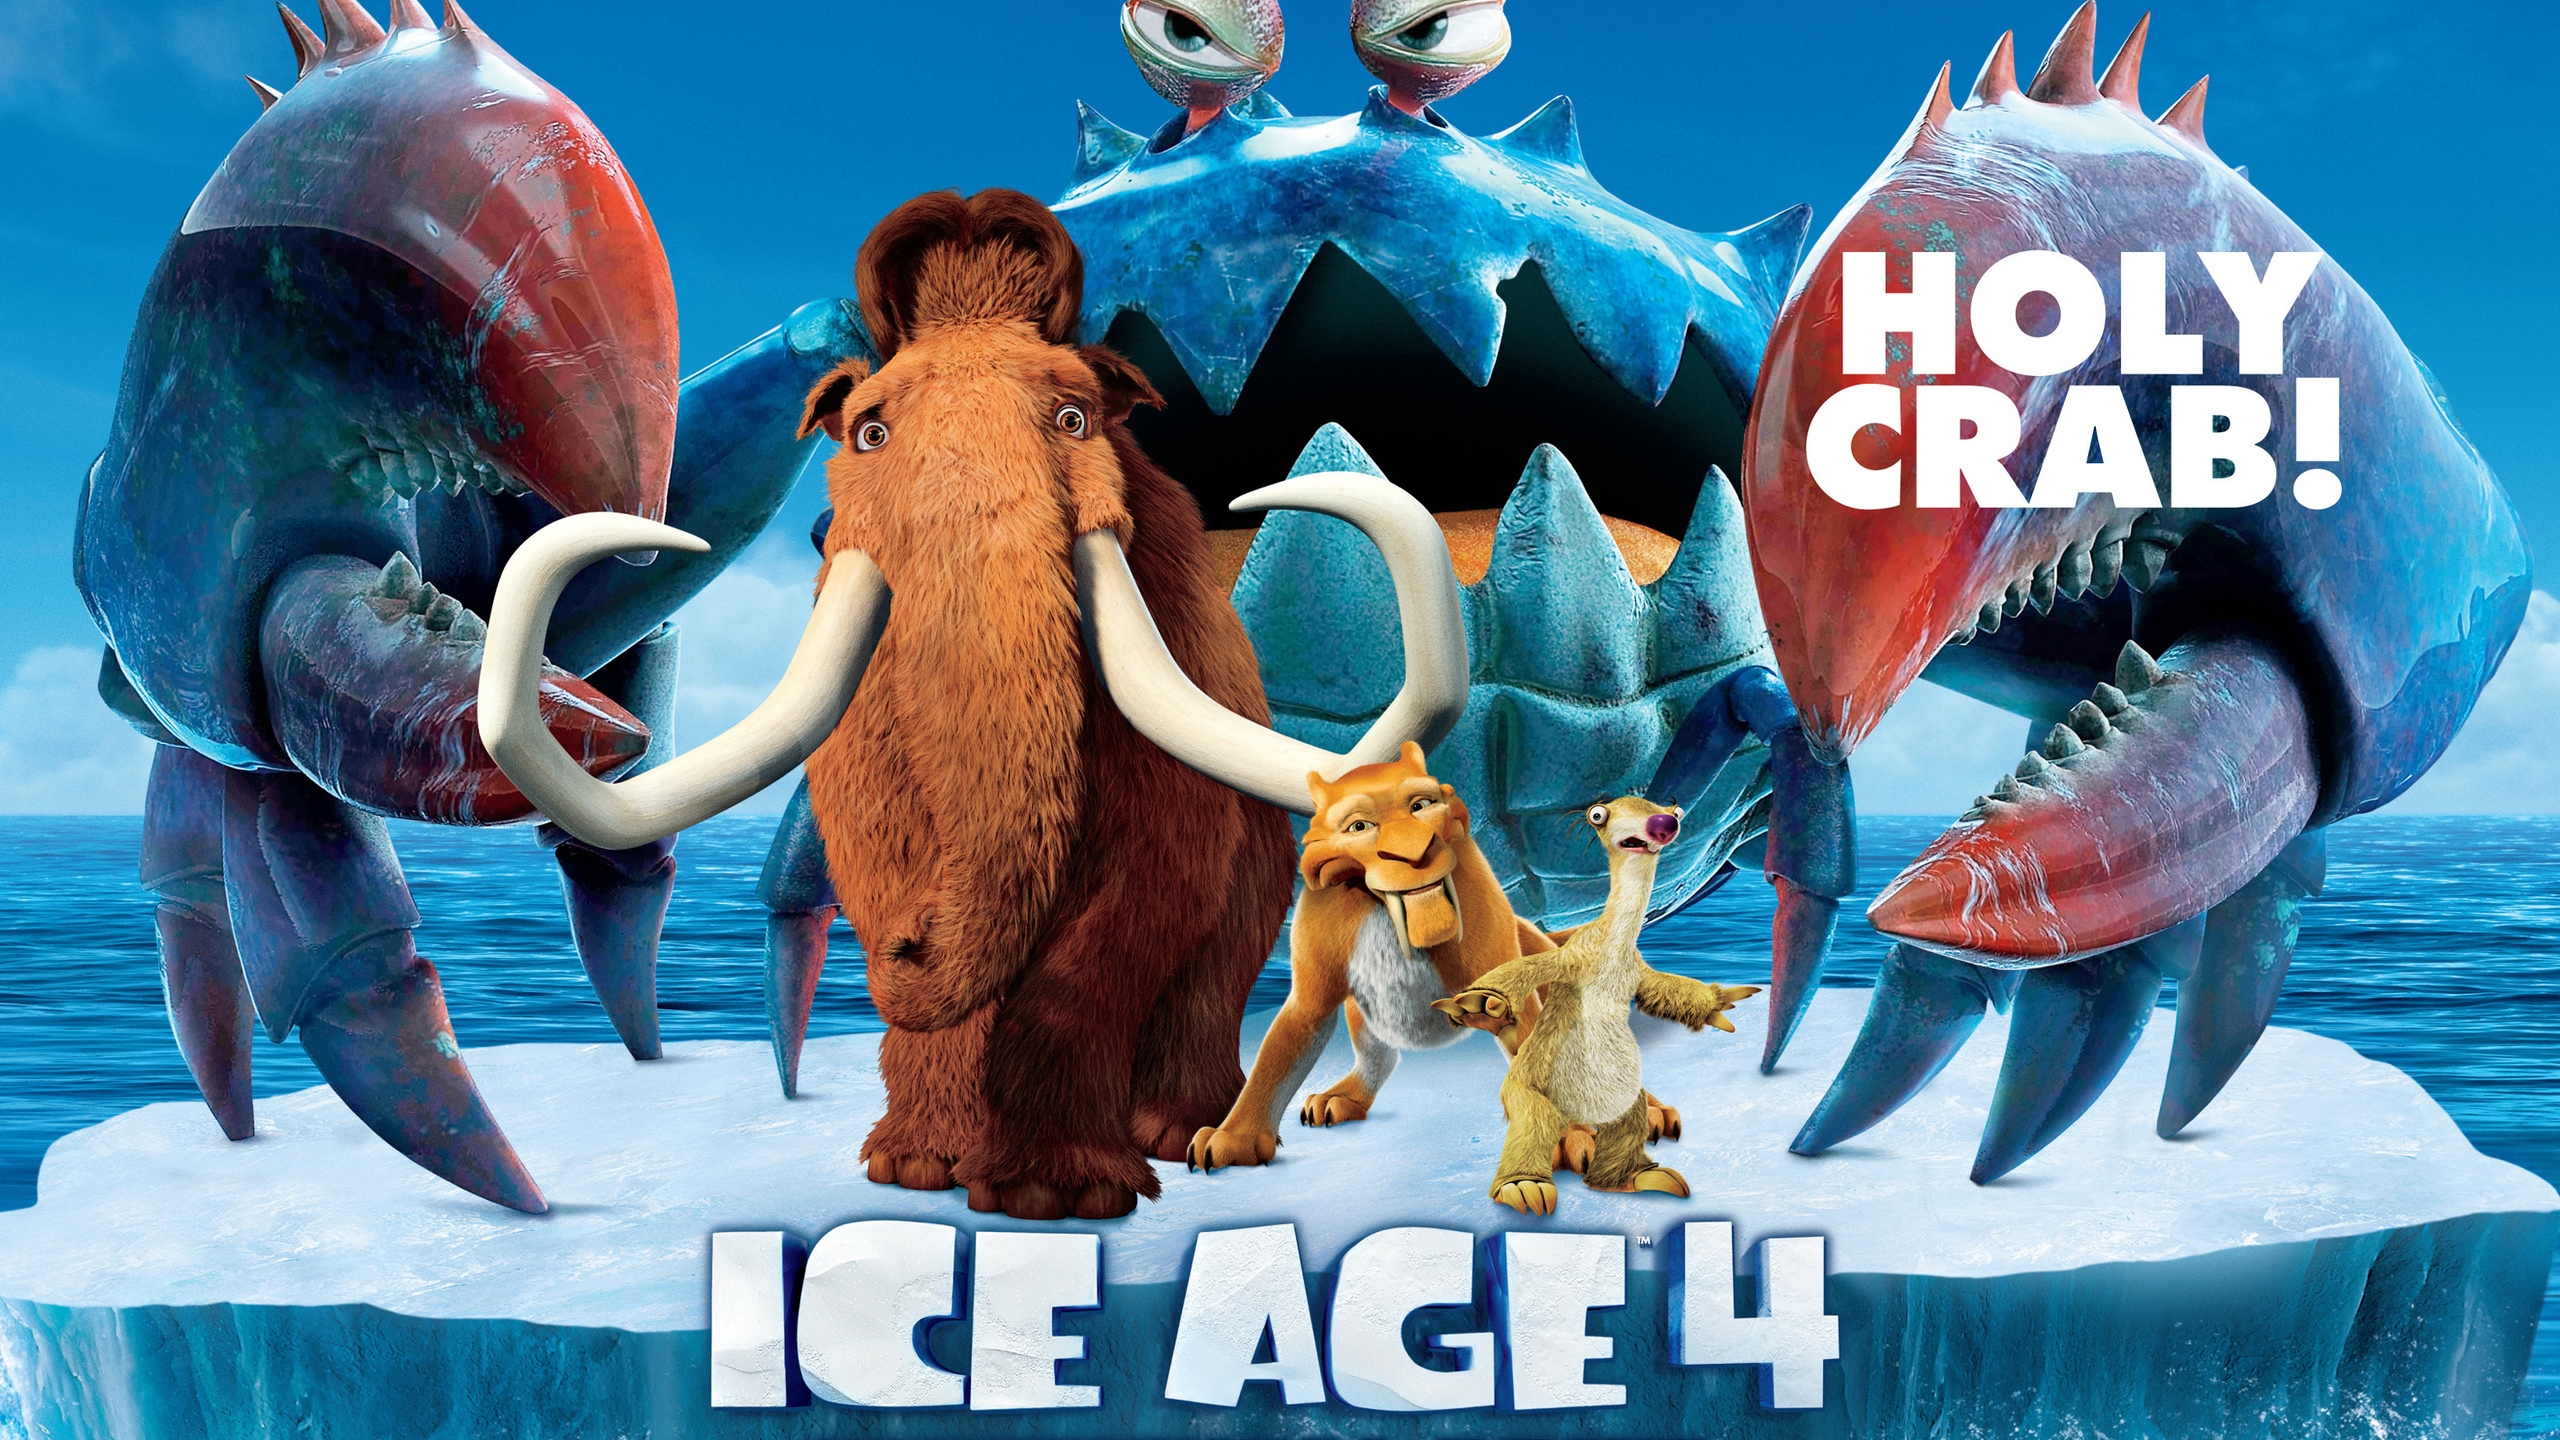 Ice Age 4 Holy Crab for 2560x1440 HDTV resolution